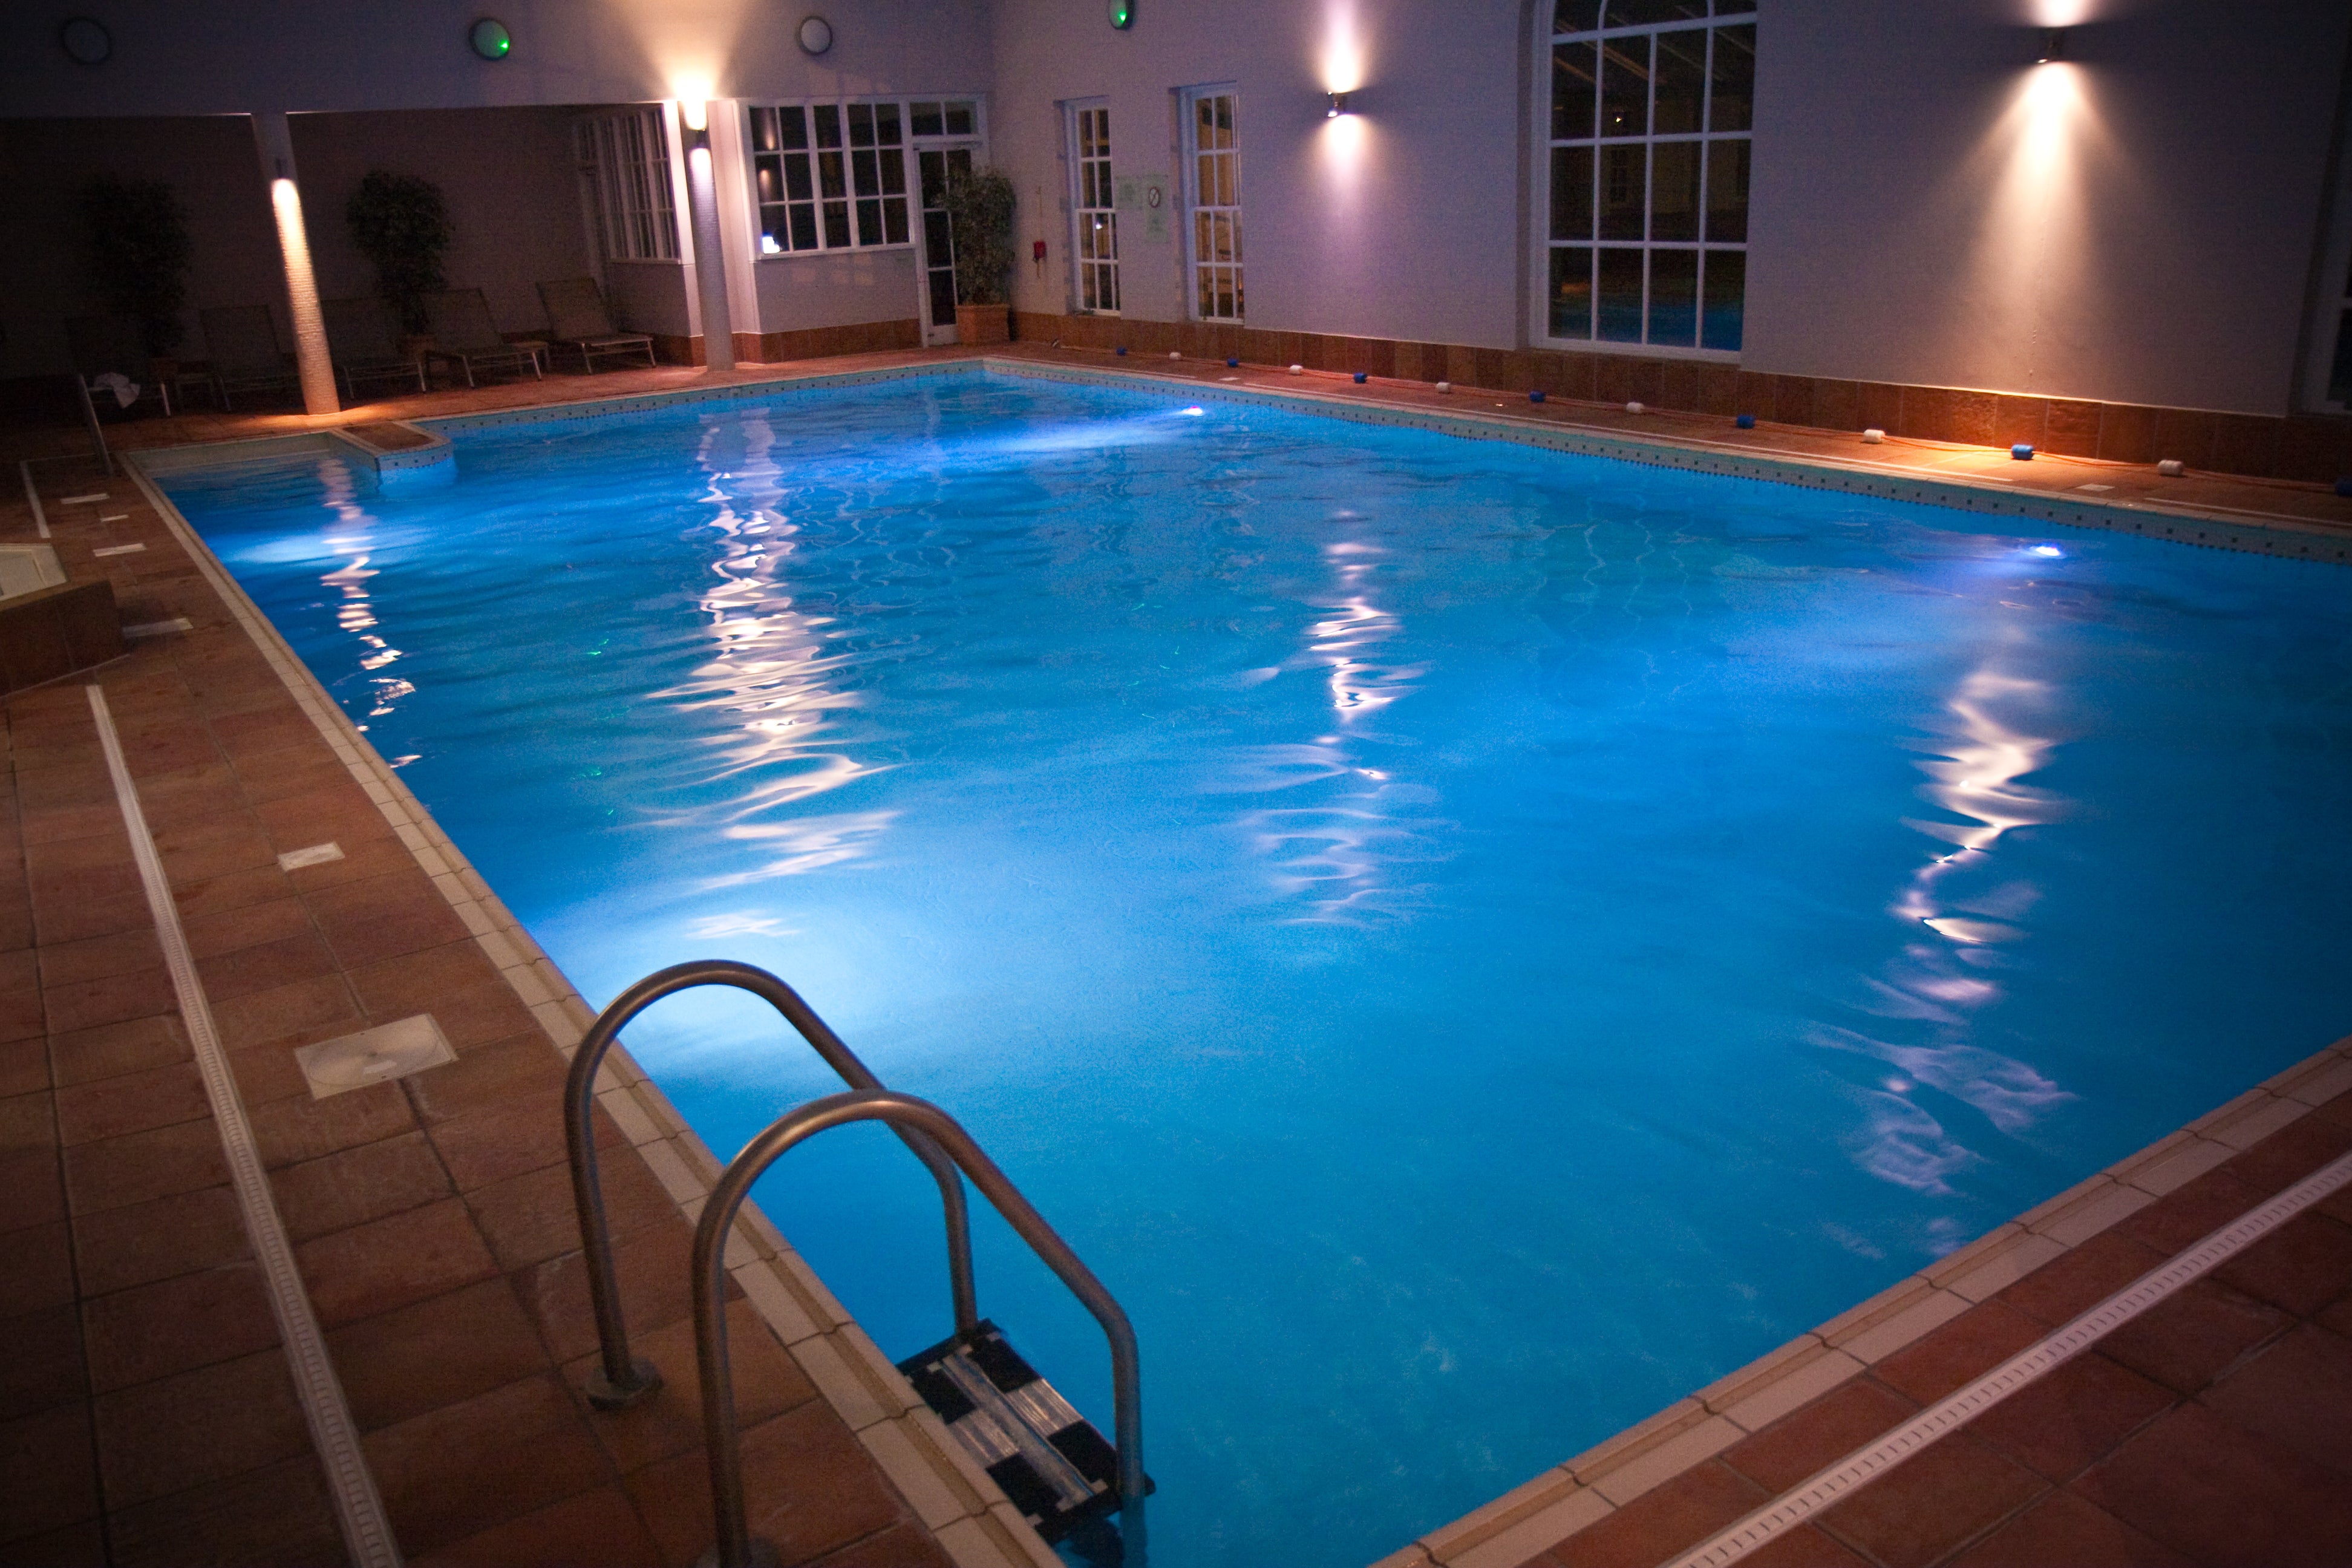 Try out the hydrotherapy pool or look out over Suffolk from the outdoor hot tub